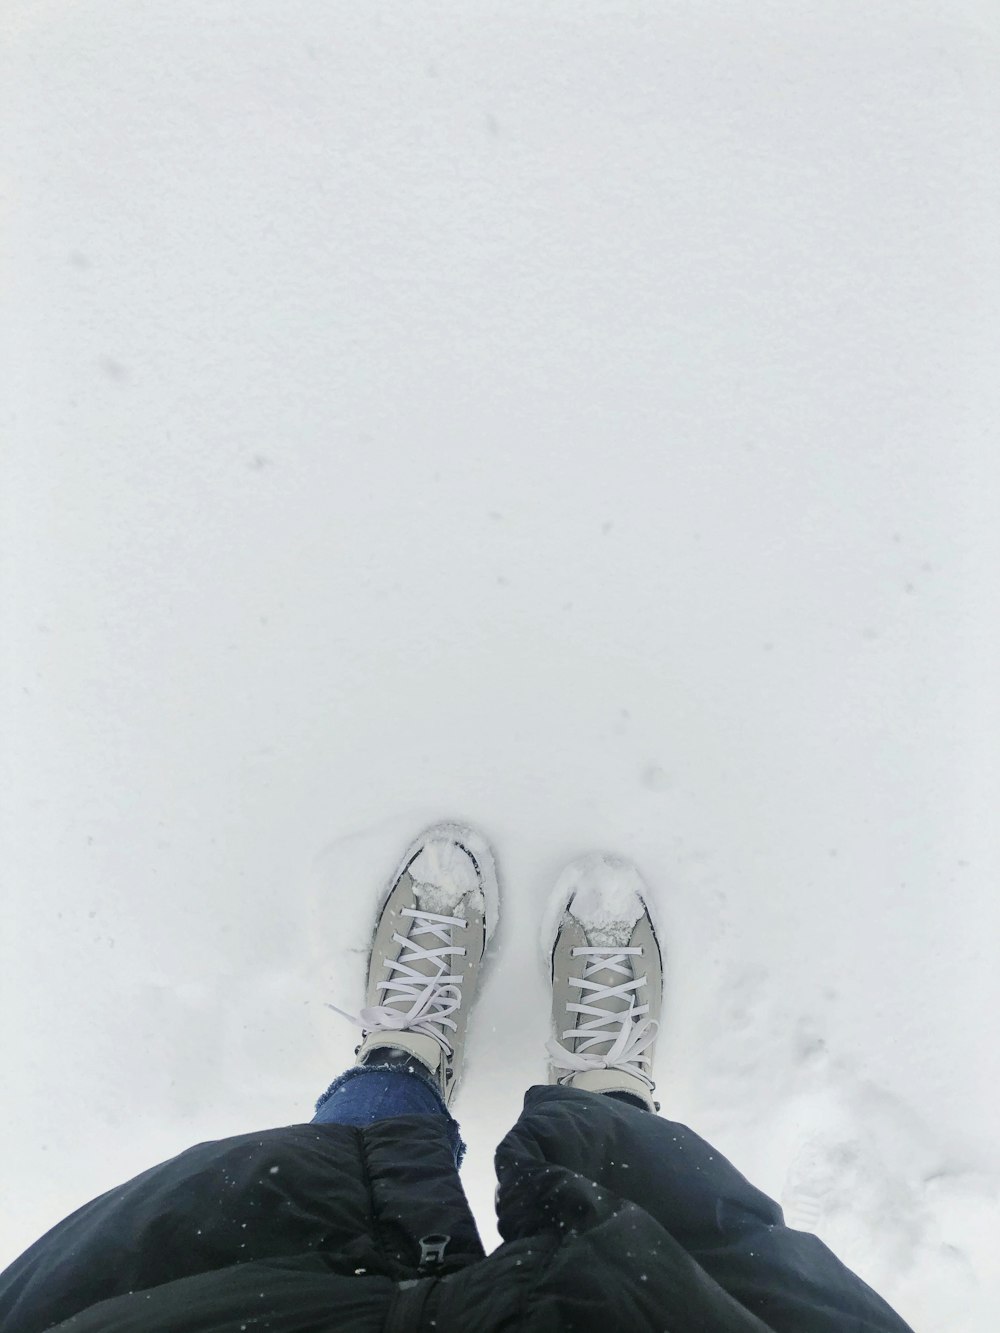 person in blue and white sneakers standing on snow covered ground